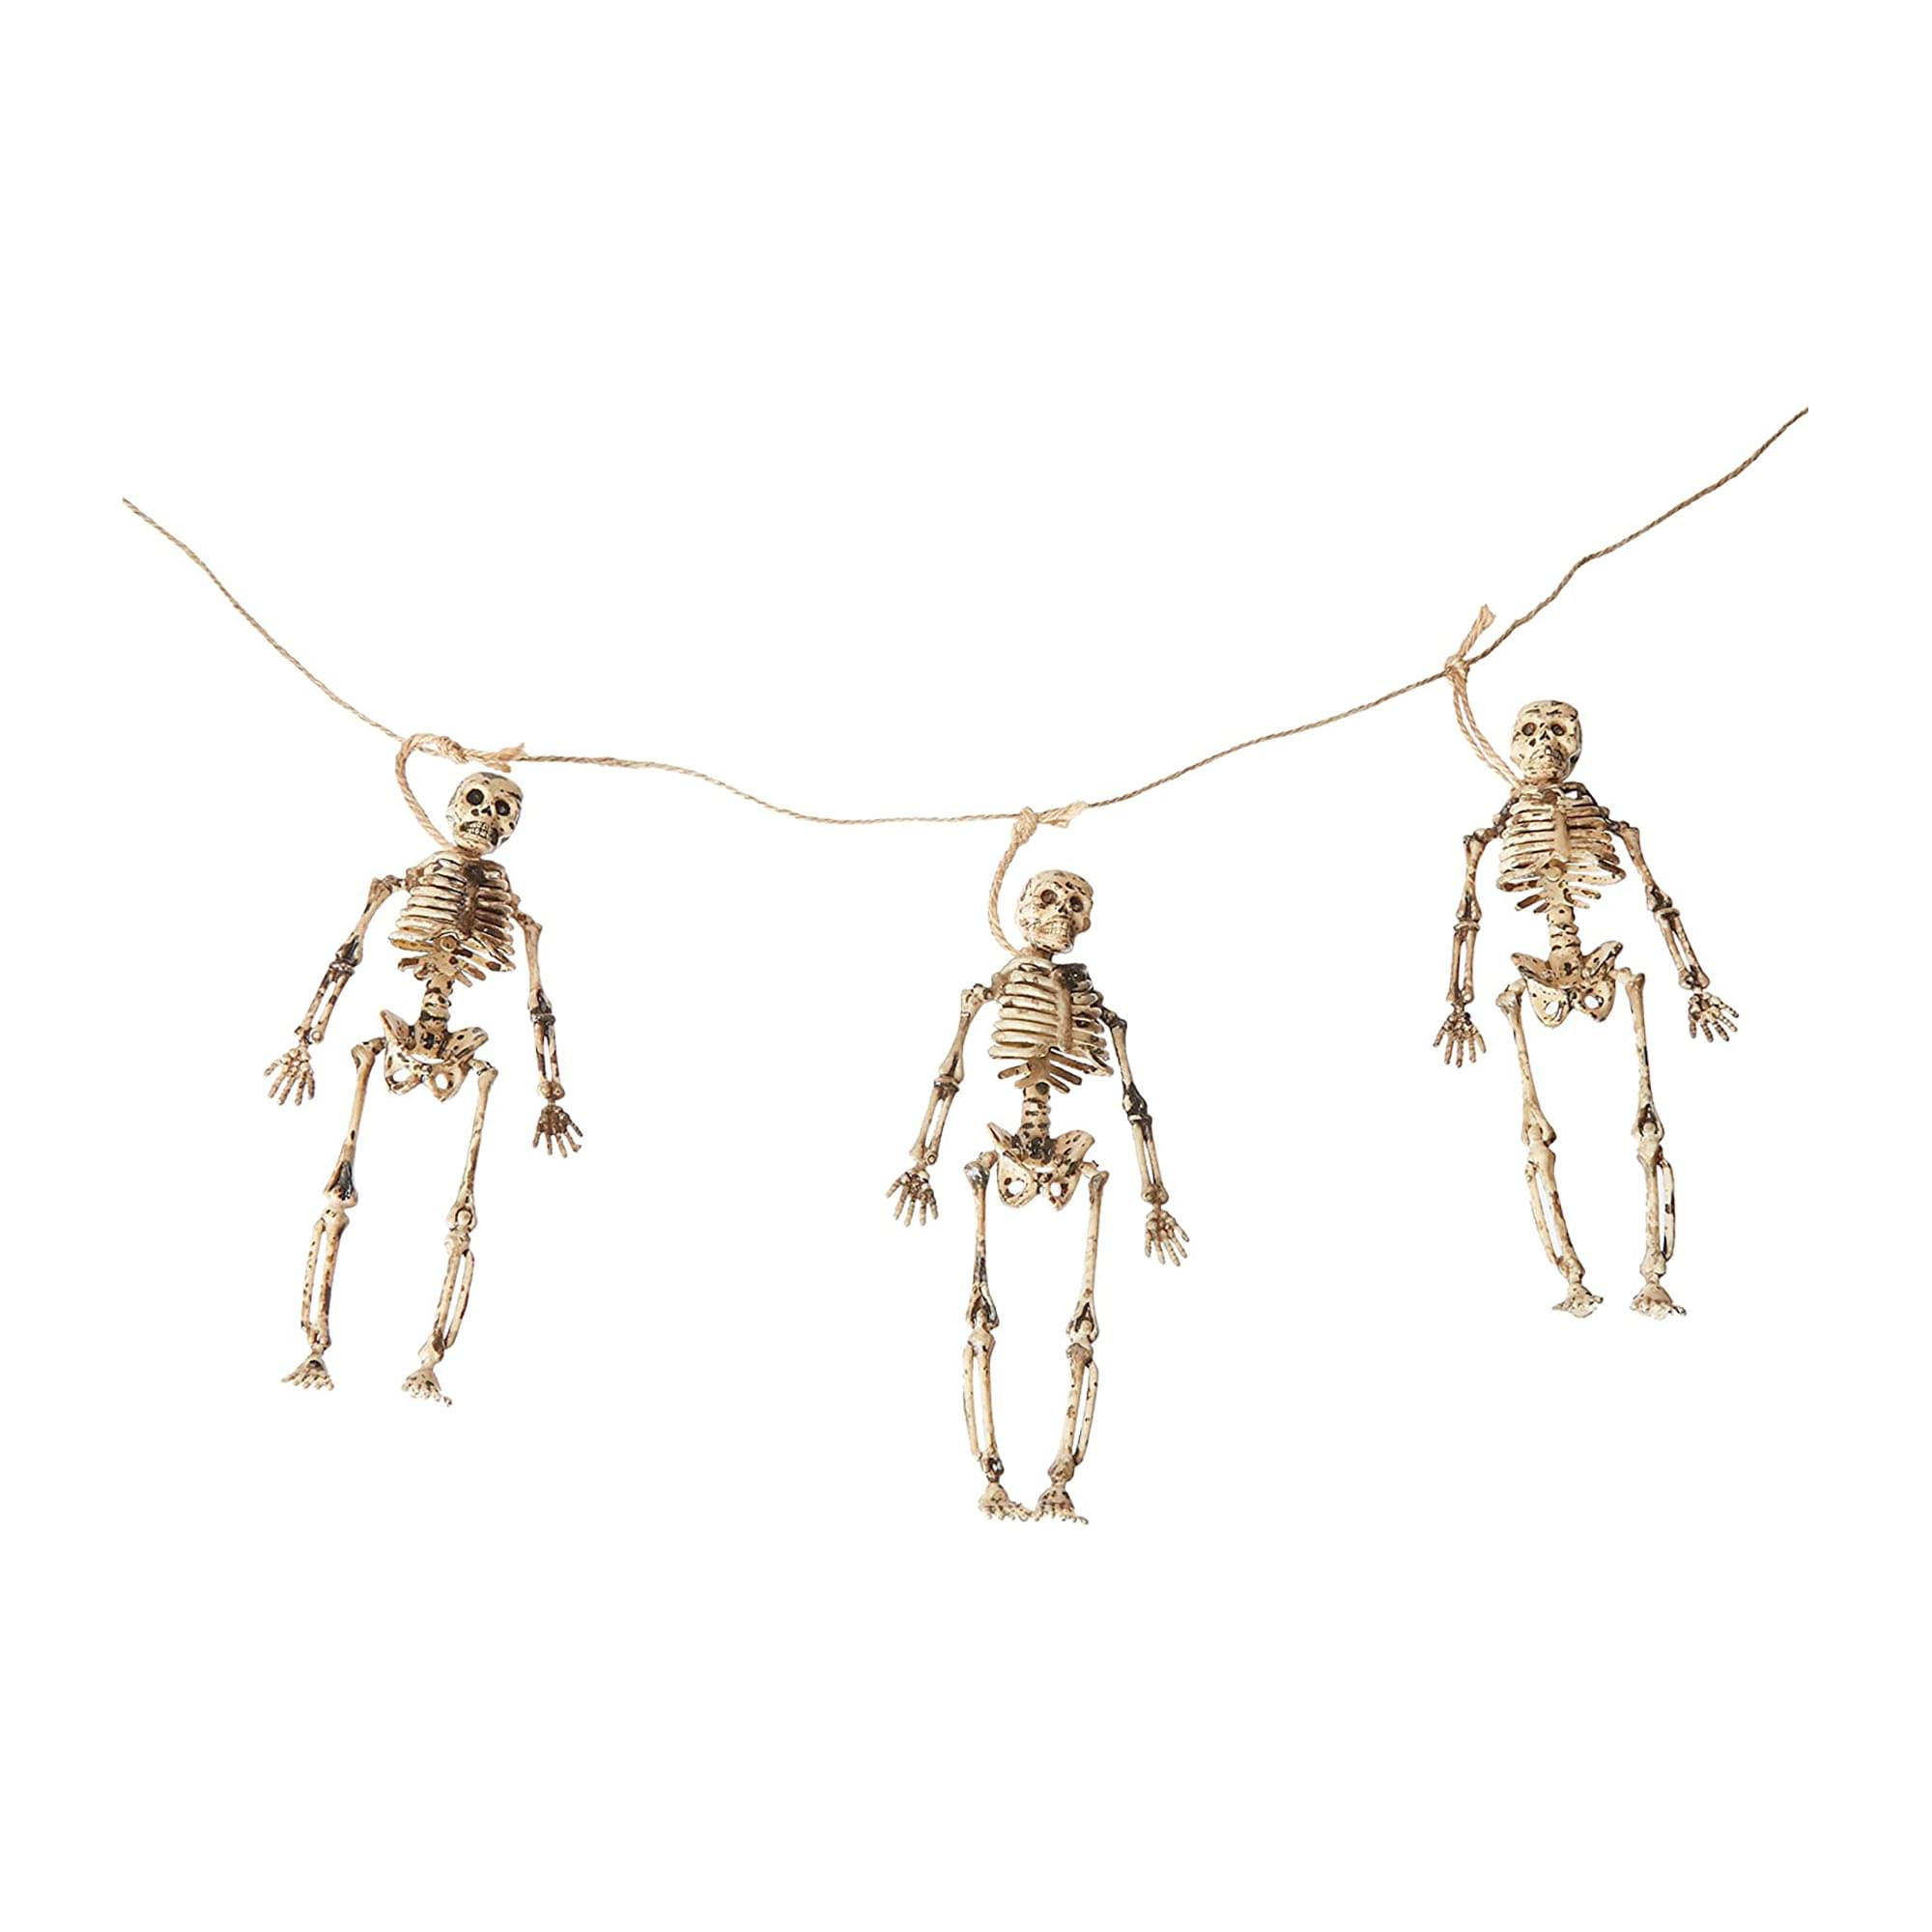 Scary Skeletons 72 Inch Garland Decoration